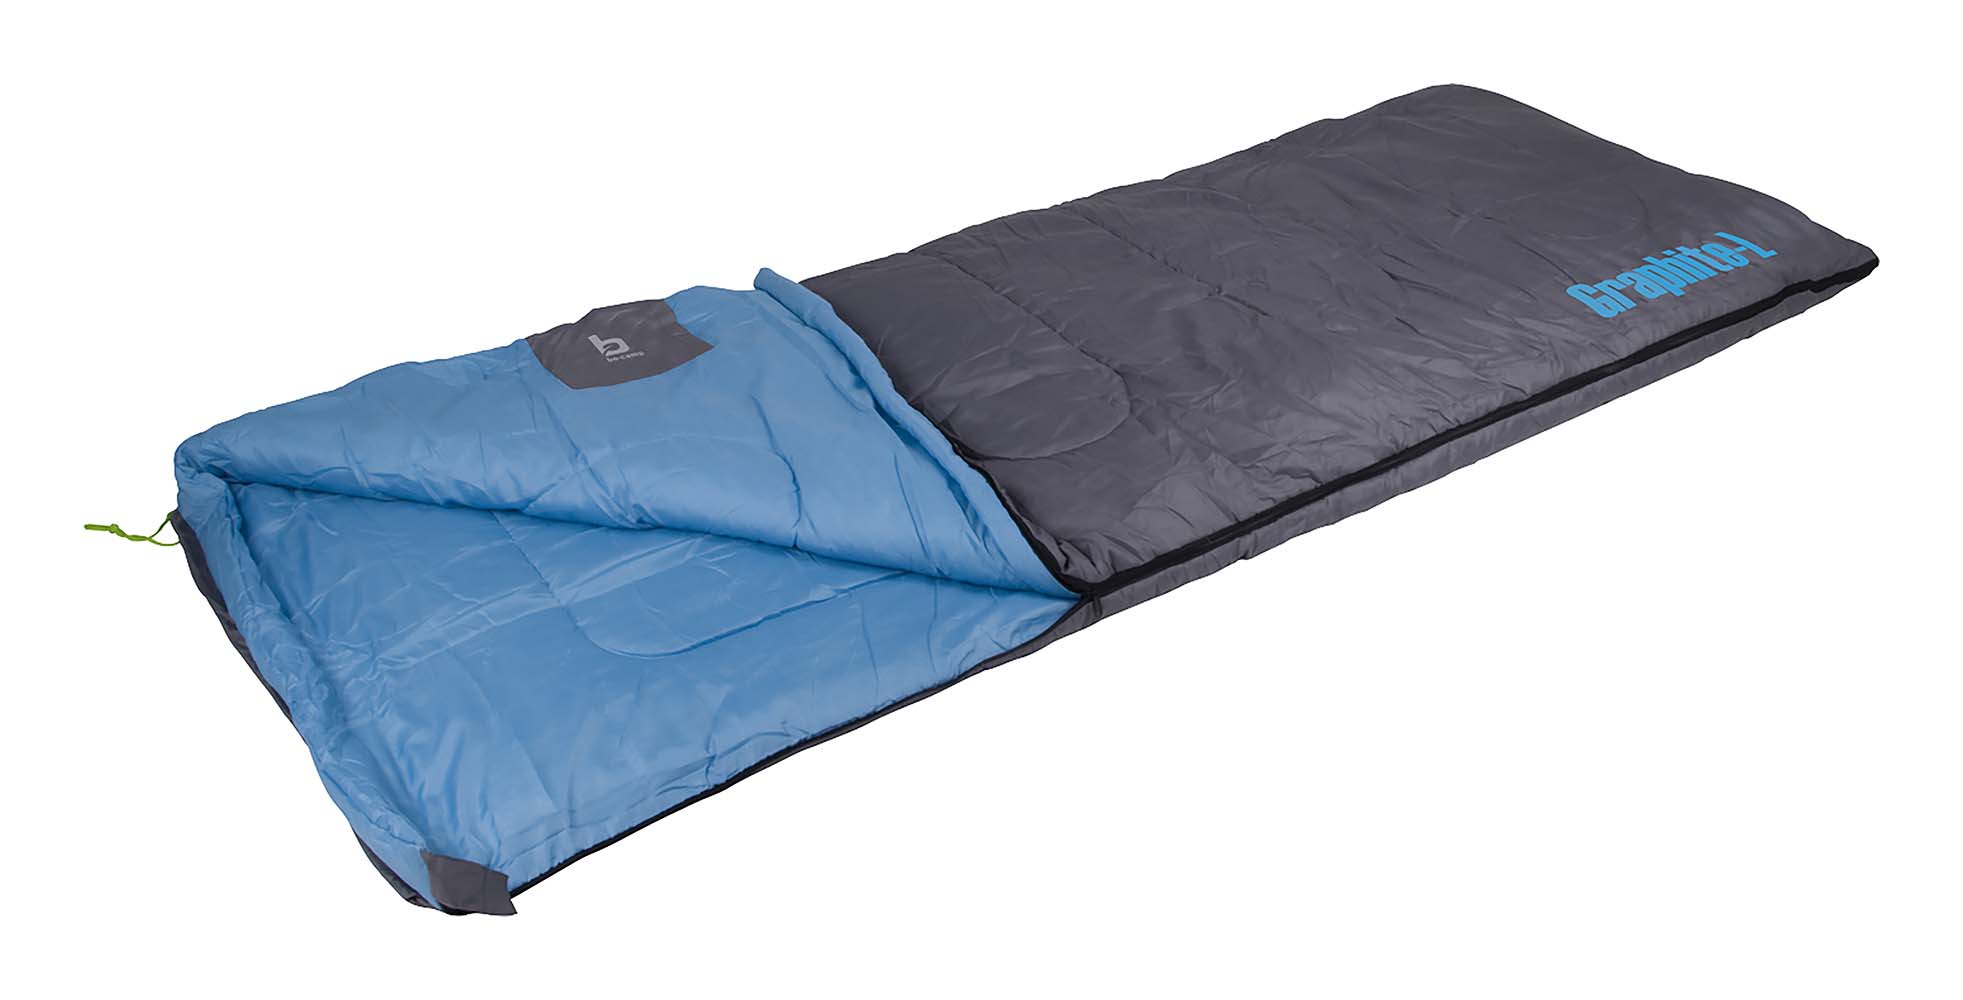 3605753 A comfortable sleeping bag Suitable for use from 2 degrees, and very comfortable from 12 degrees. With high-quality 250 g/m² 3D Hollow Fibre filling. This sleeping bag also has a soft polyester cotton inner and outer lining. Zipped open the sleeping bag can be used as blanket or zipped onto another Bo-Camp sleeping bag. This sleeping bag has temperature regulation by a zip at the foot end, a drawstring, a comfortable top edge and a money pocket on the inside. Compact to carry in the provided slipcase.